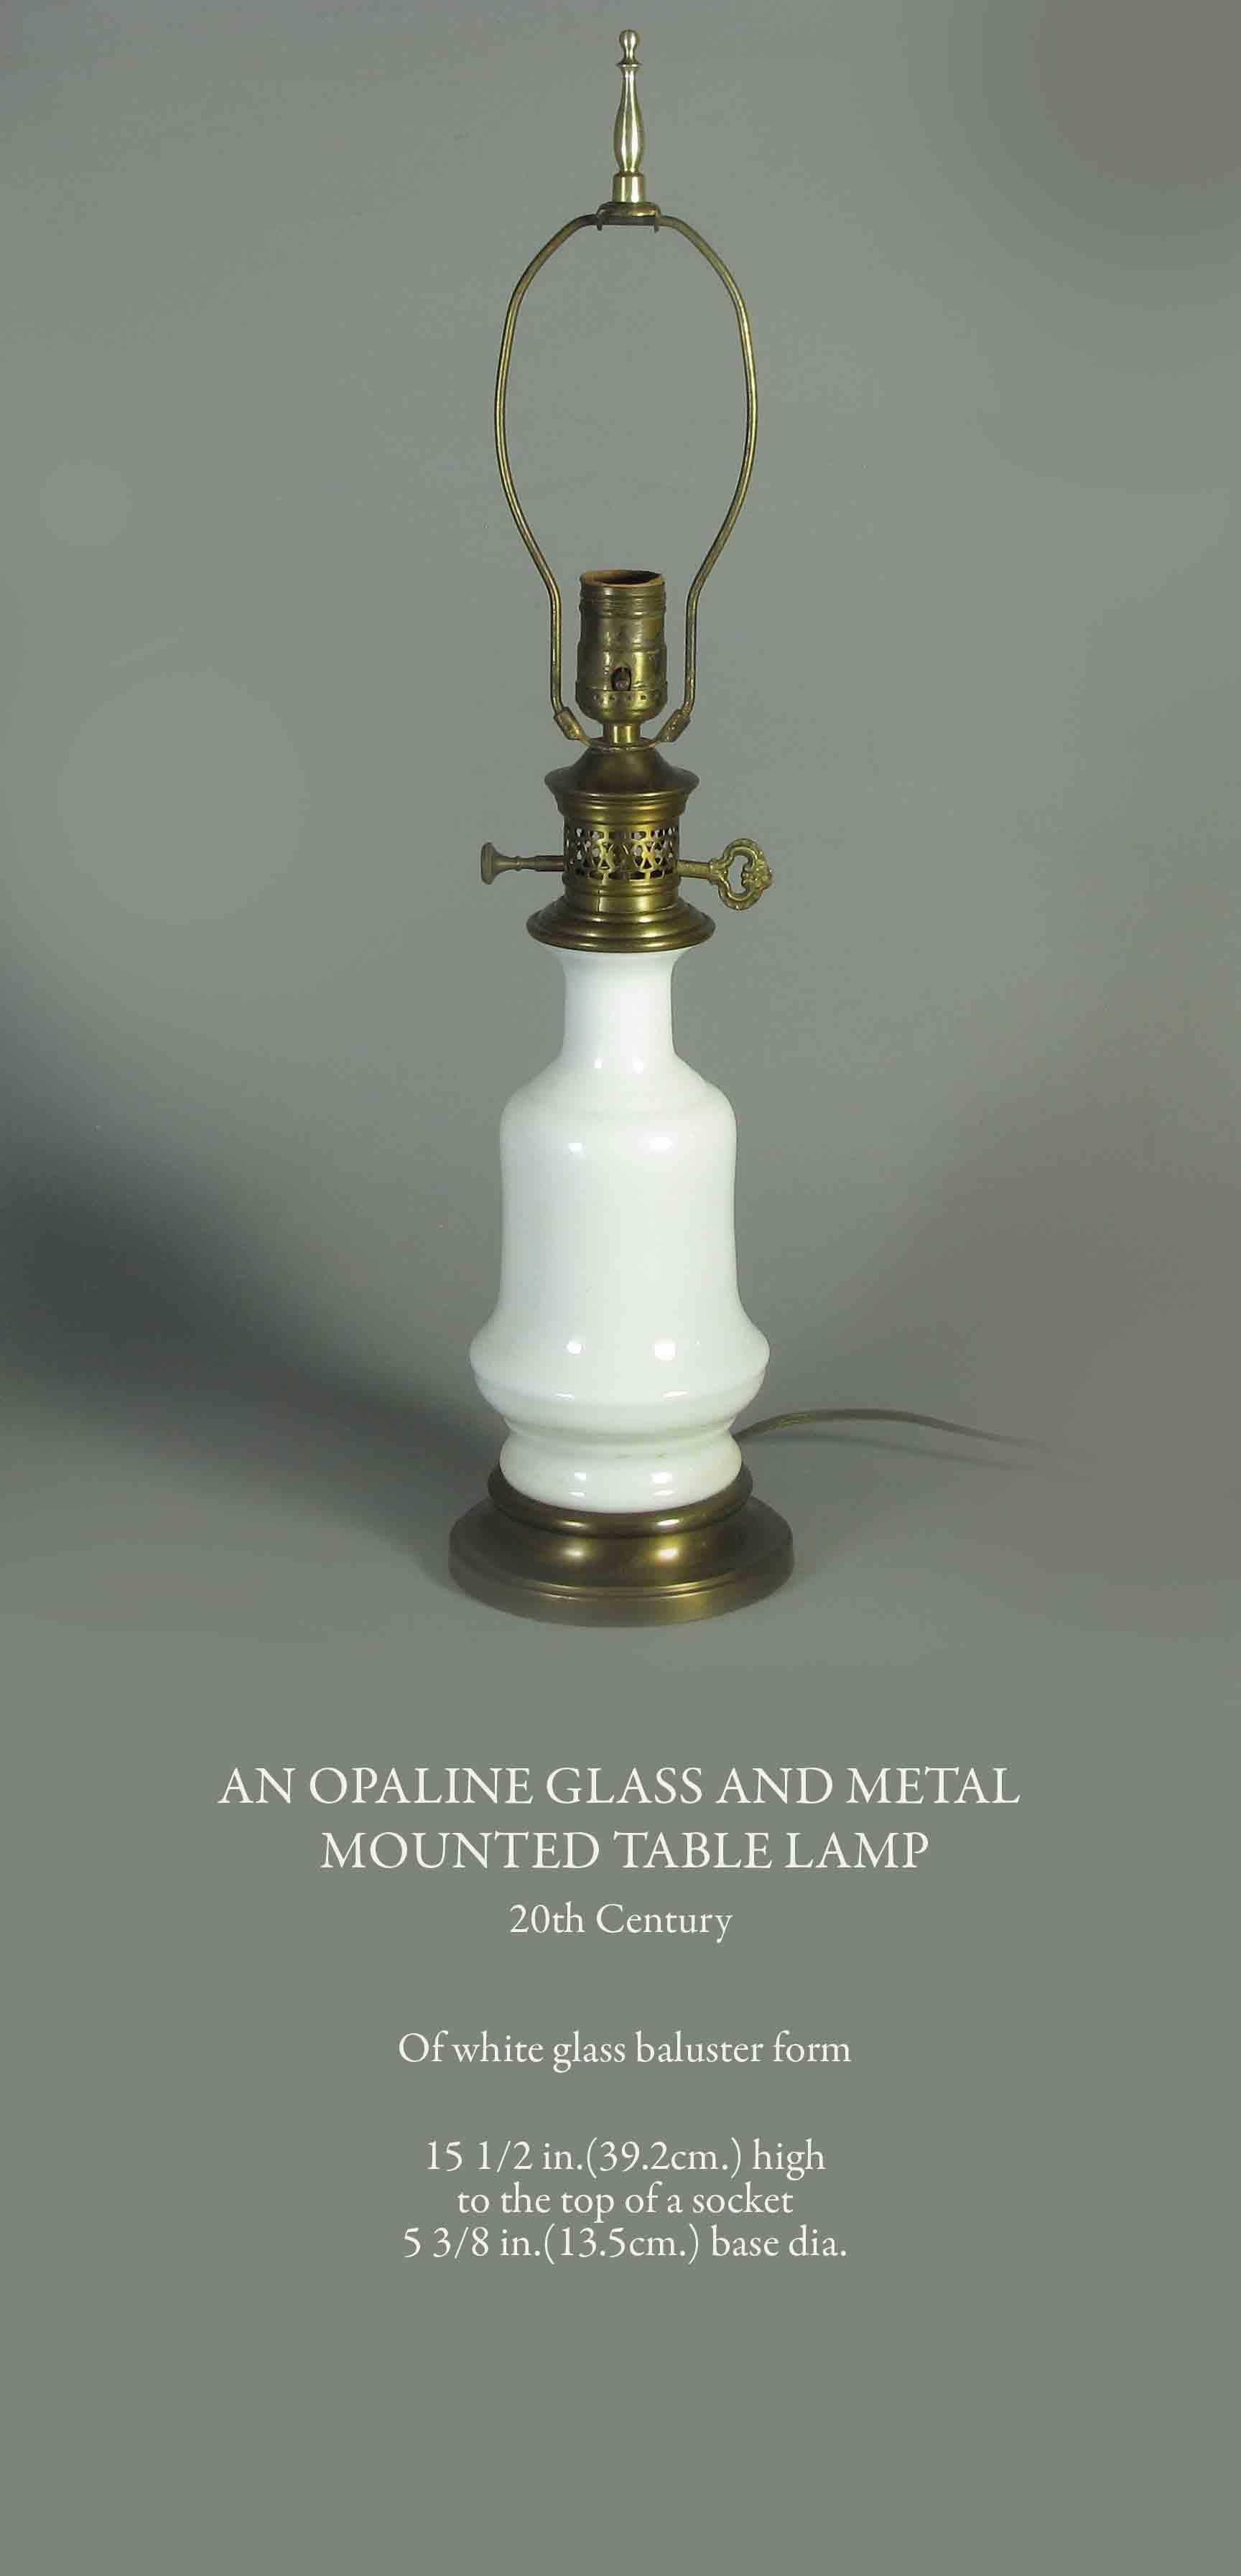 An opaline glass and metal
mounted table lamp
20th Century. 

Of white glass baluster form.

15 1/2 in.(39.2cm.) high
to the top of a socket
5 3/8 in.(13.5cm.) base diameter.